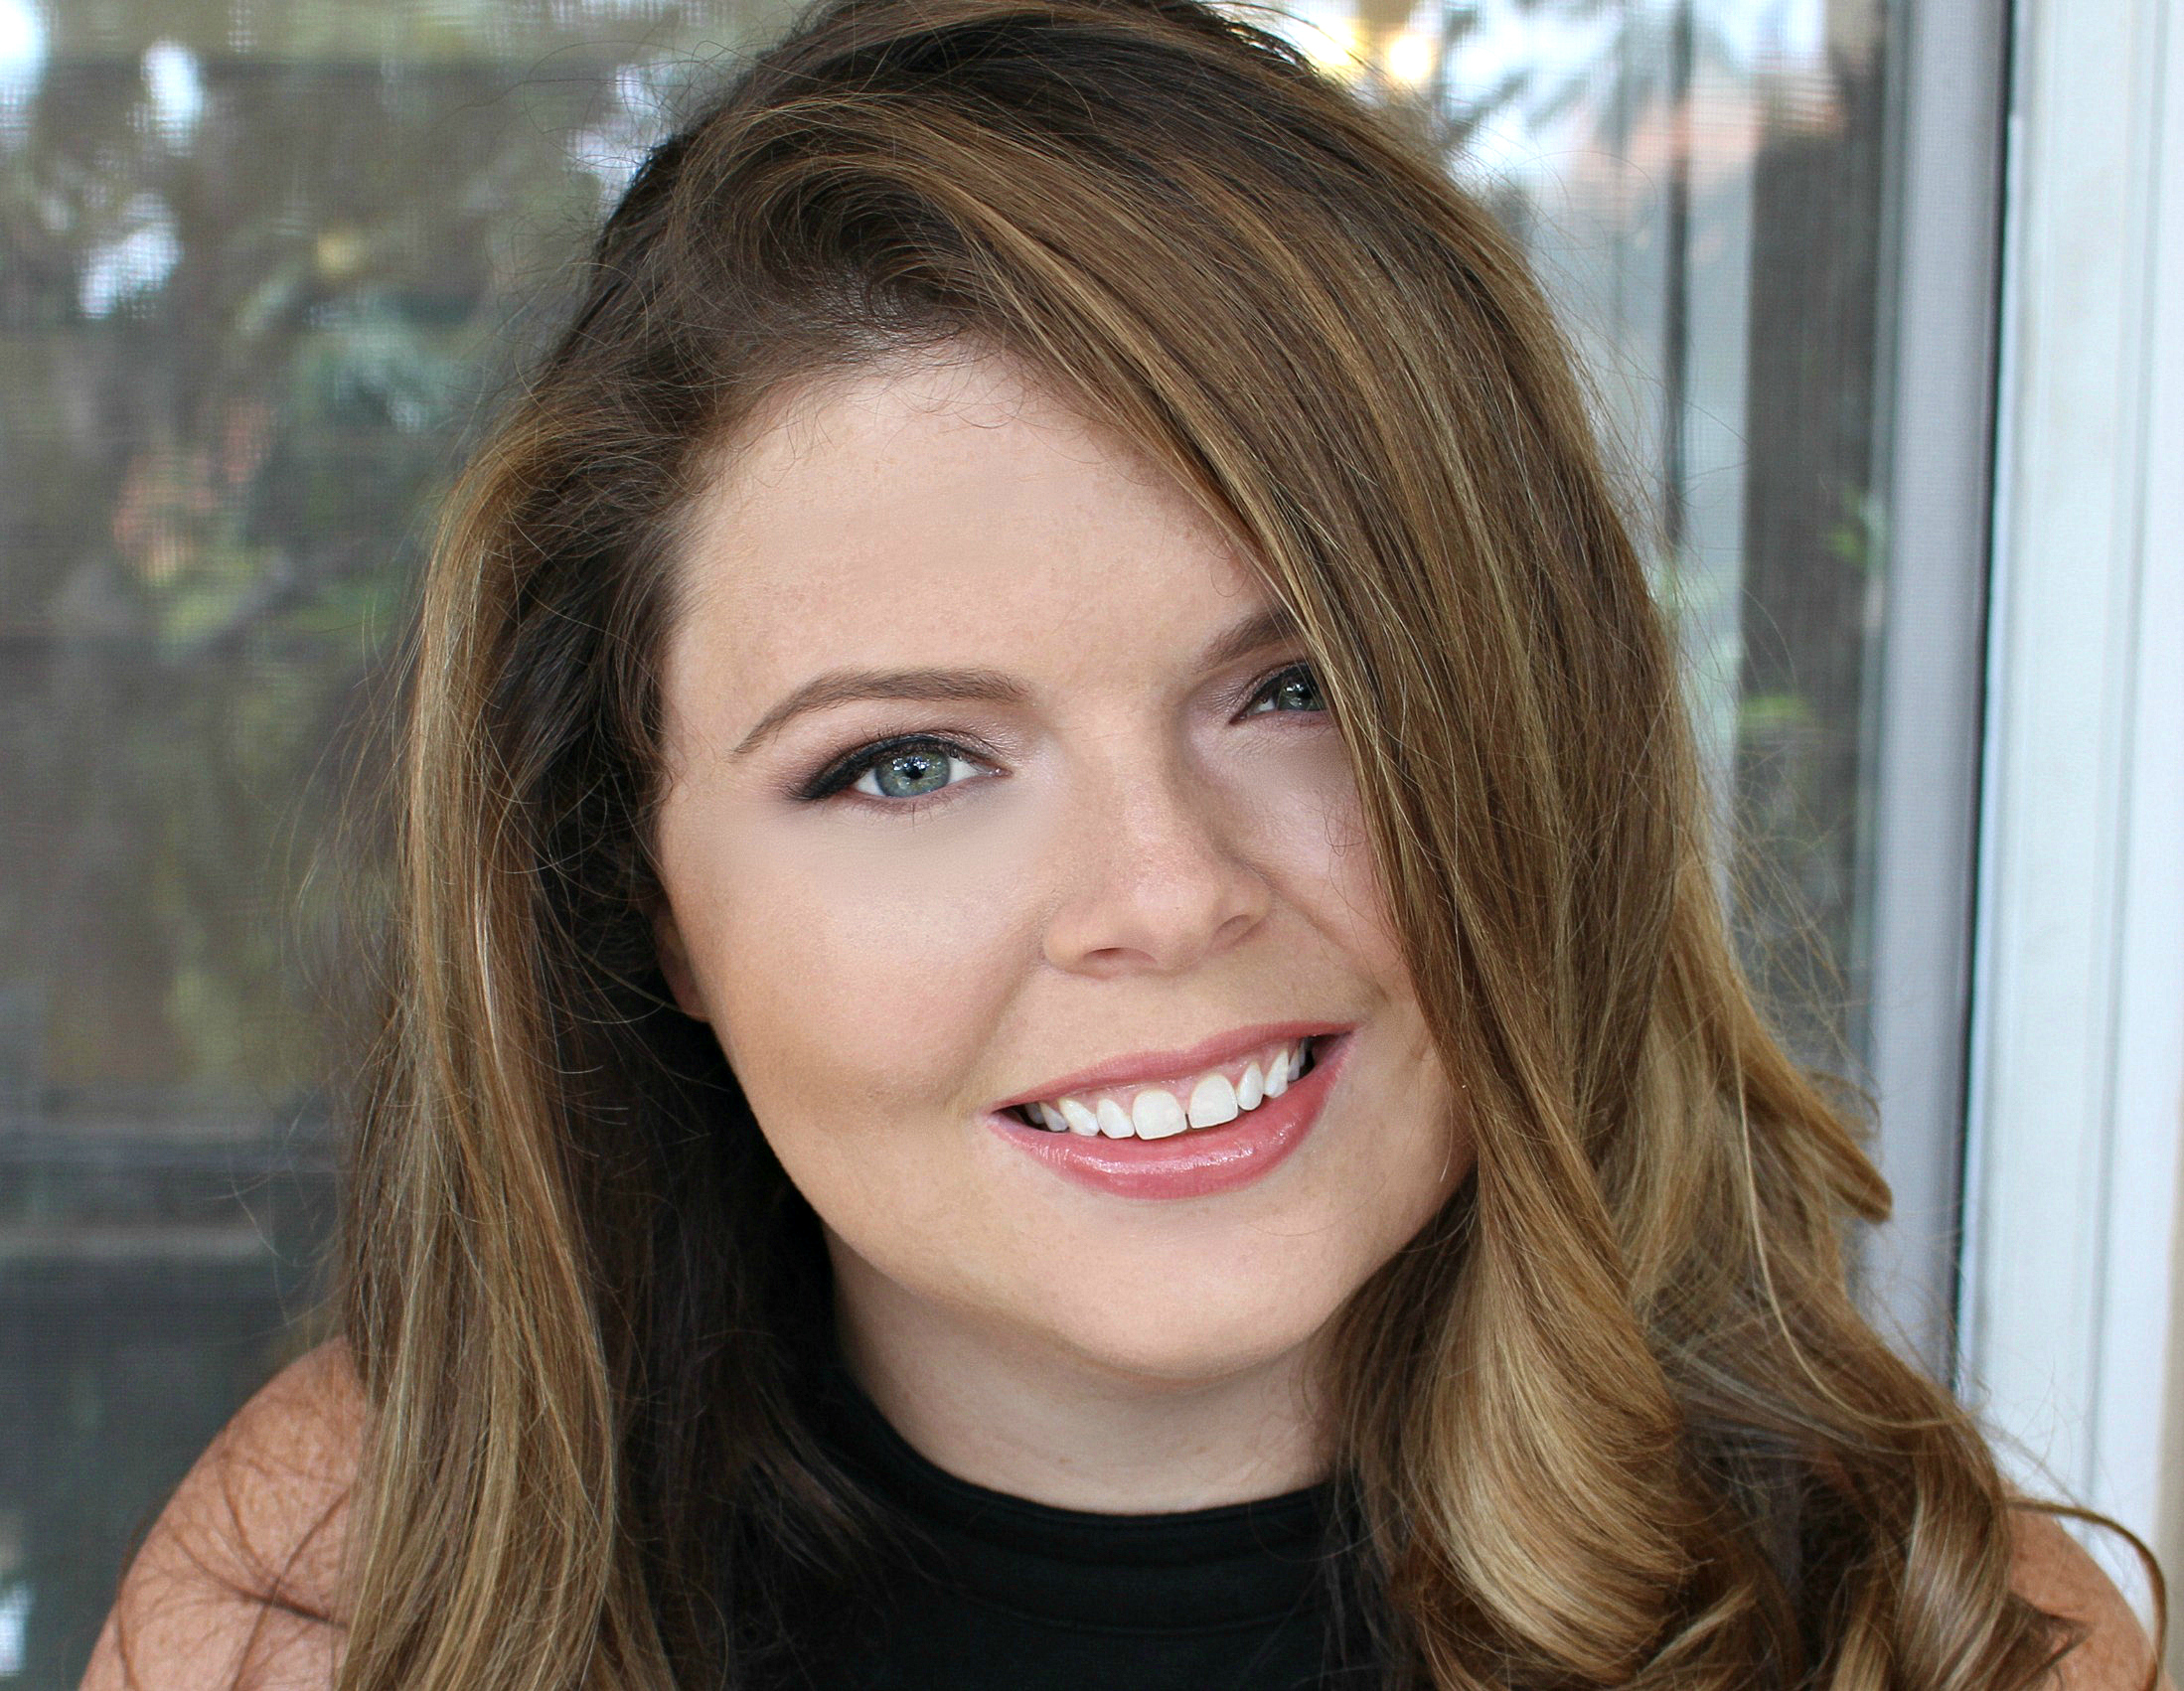 Cassie Petrey, Co-Founder and CEO of Crowd Surf